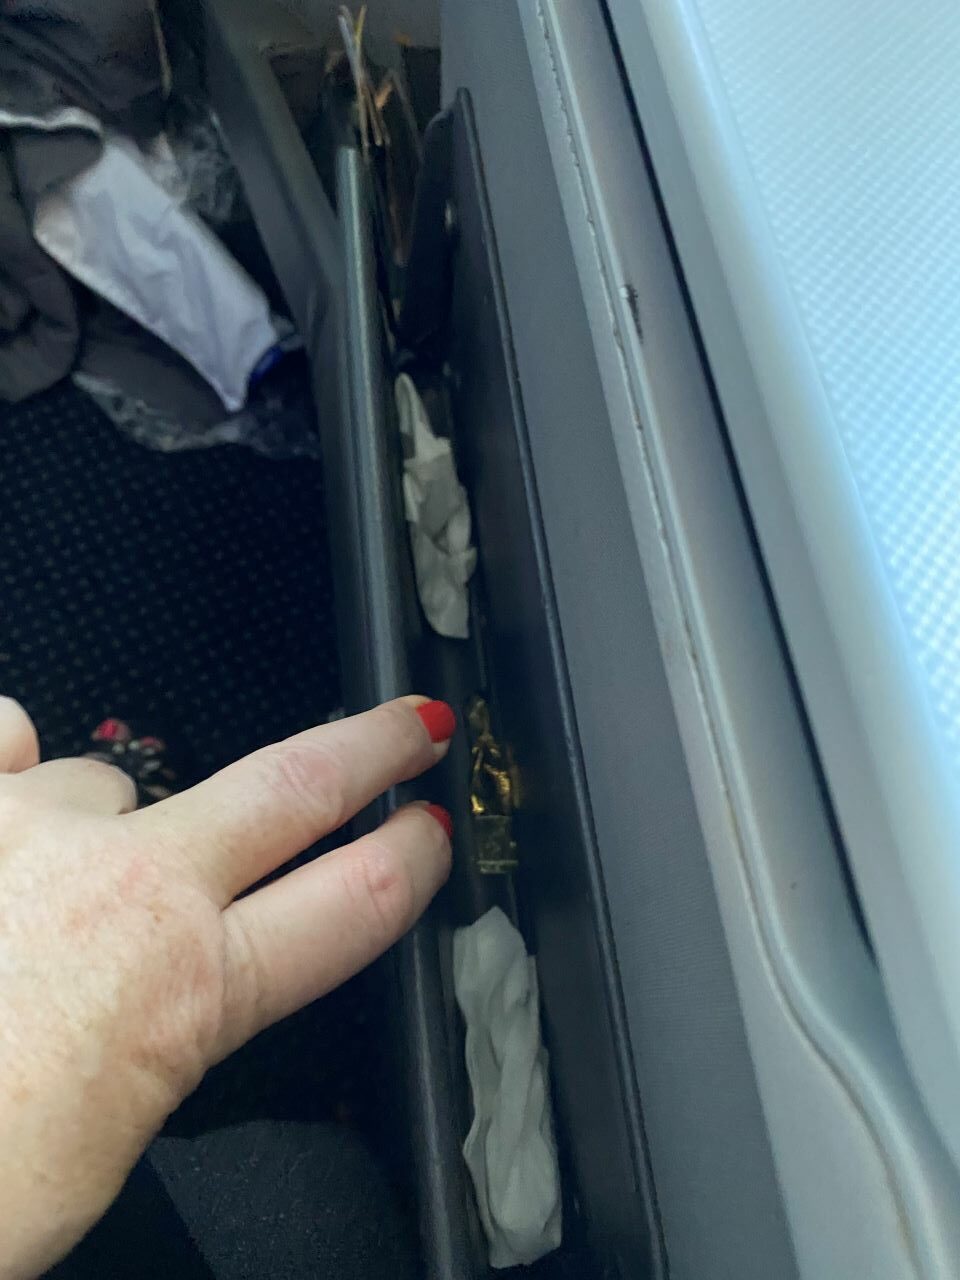 American Airlines business class arm pocket storage